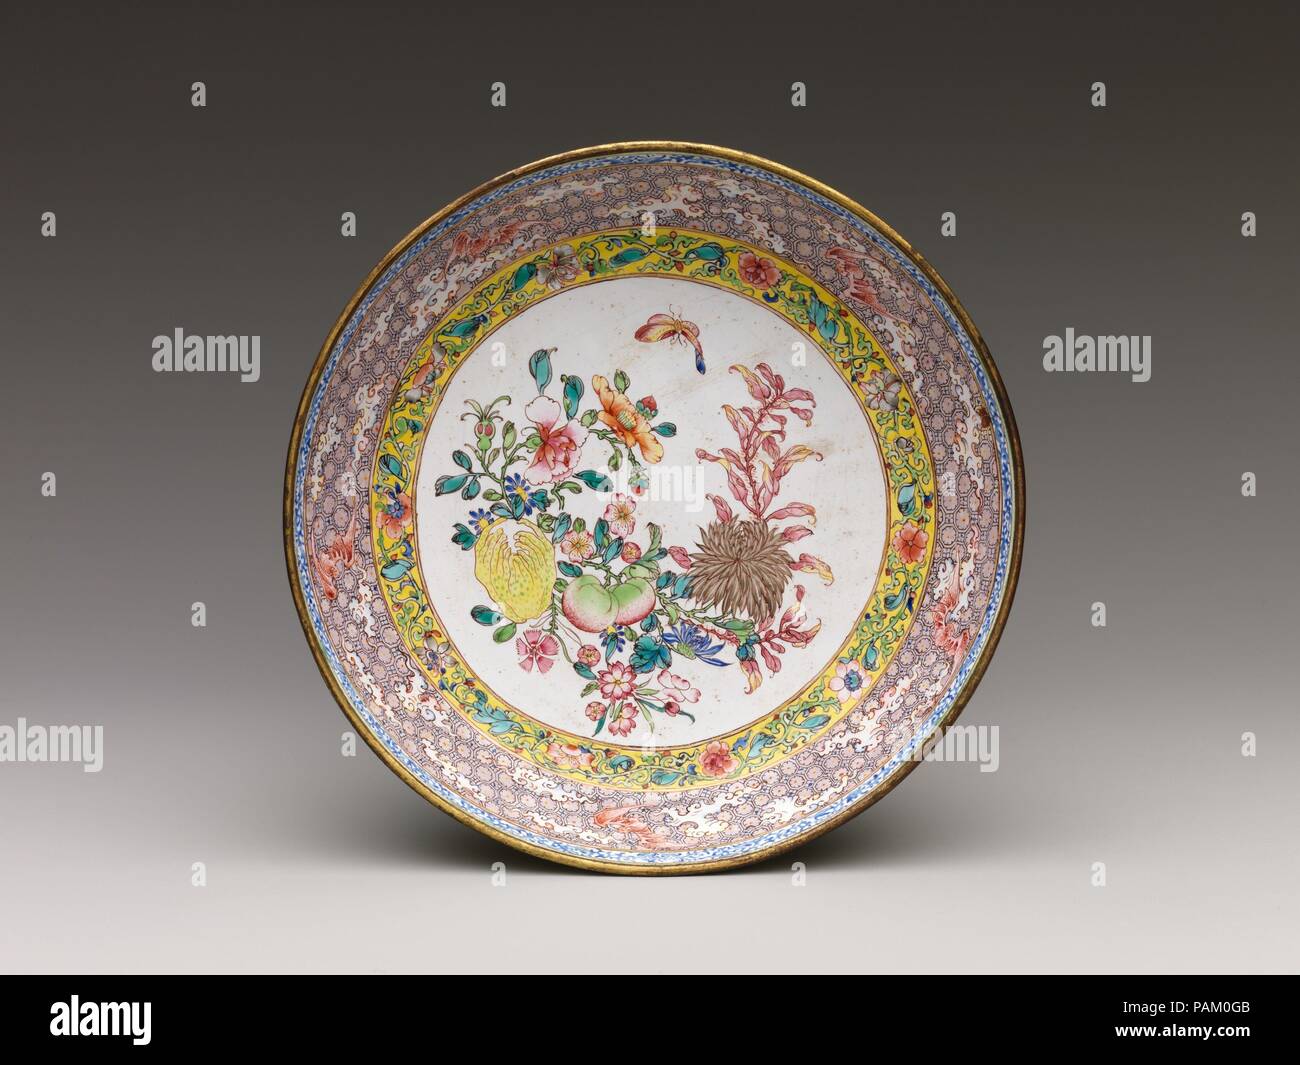 Dish with Flowers and Butterfly. Culture: China. Dimensions: Diam. 6 3/8 in. (16.2 cm). Date: 18th century. Museum: Metropolitan Museum of Art, New York, USA. Stock Photo